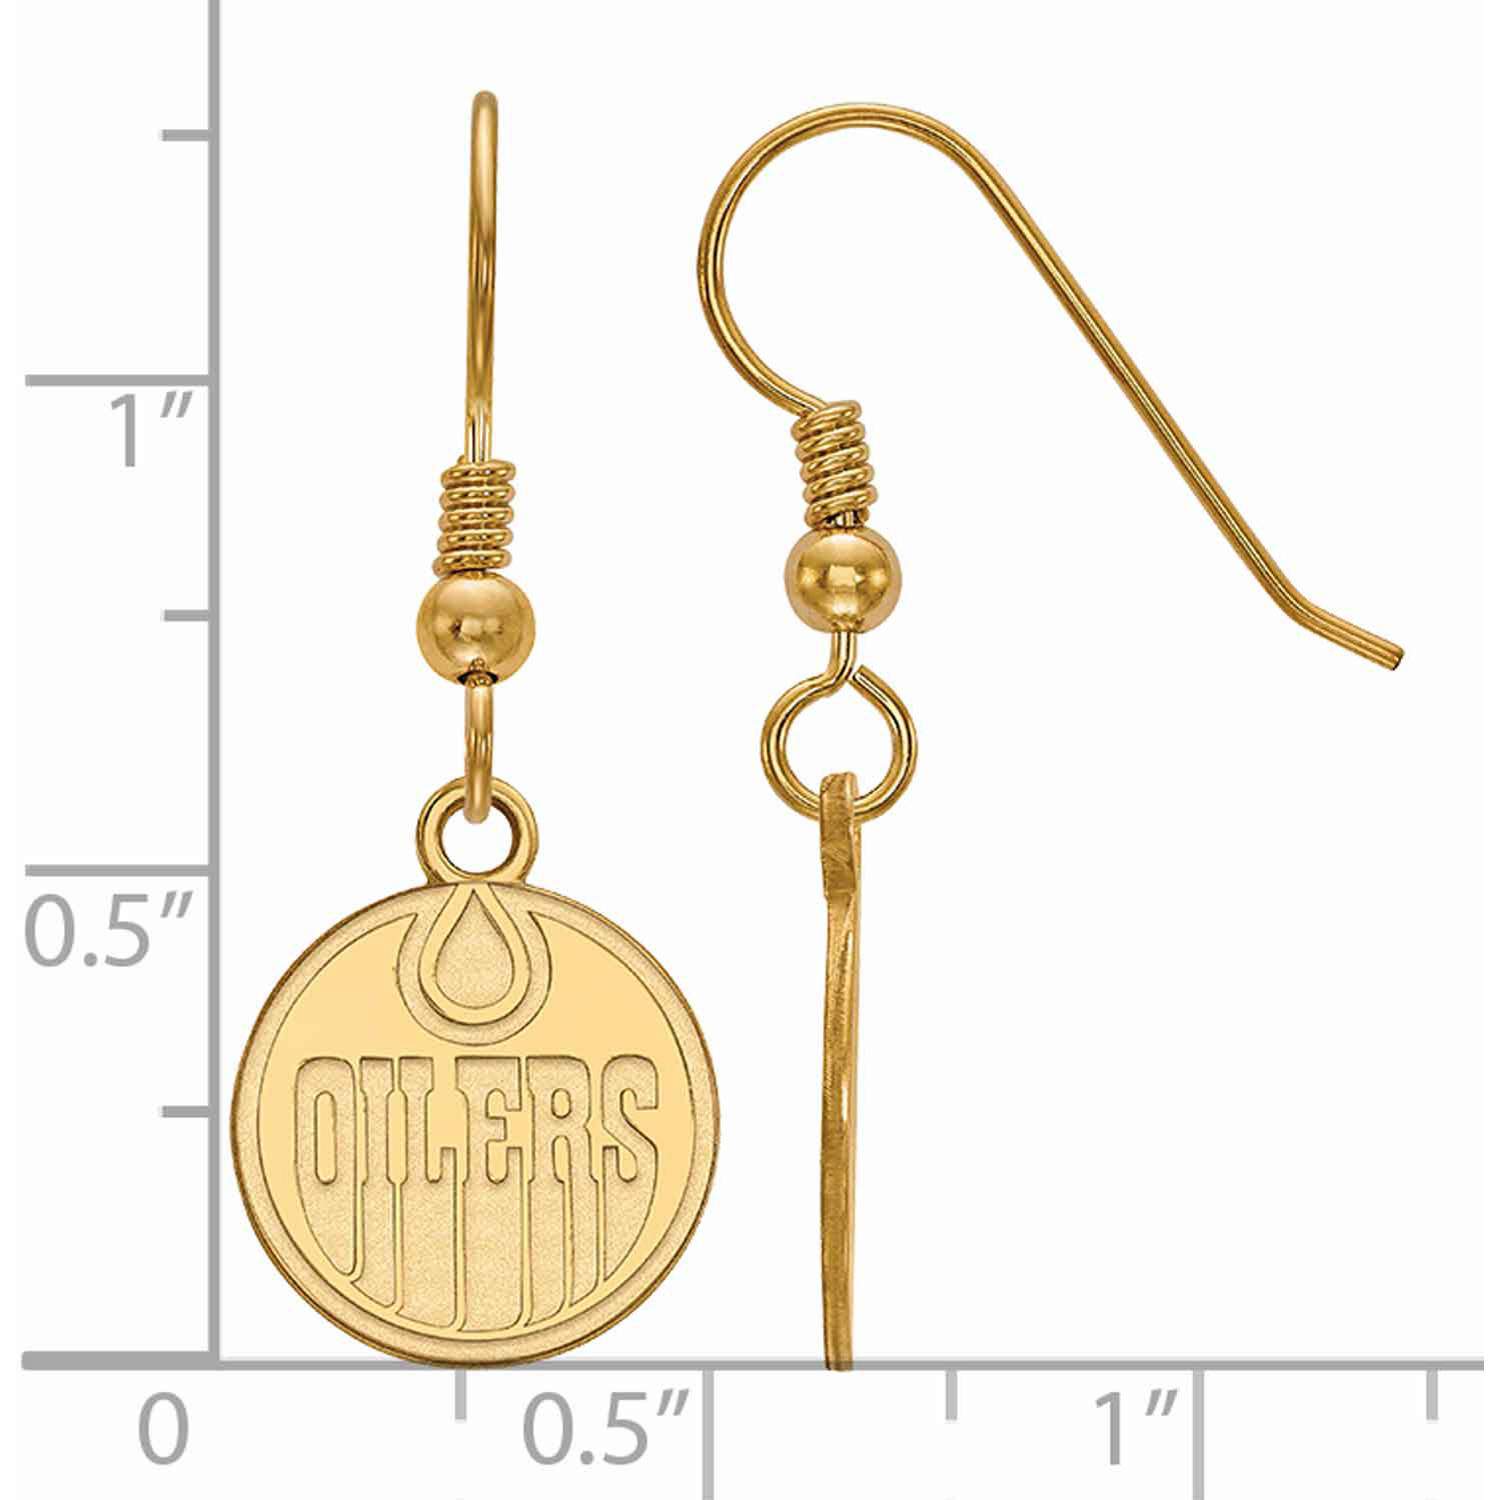 LogoArt Sterling Silver with 14 Karat Gold-plated NHL Edmonton Oilers Small Dangle Earrings - image 2 of 5